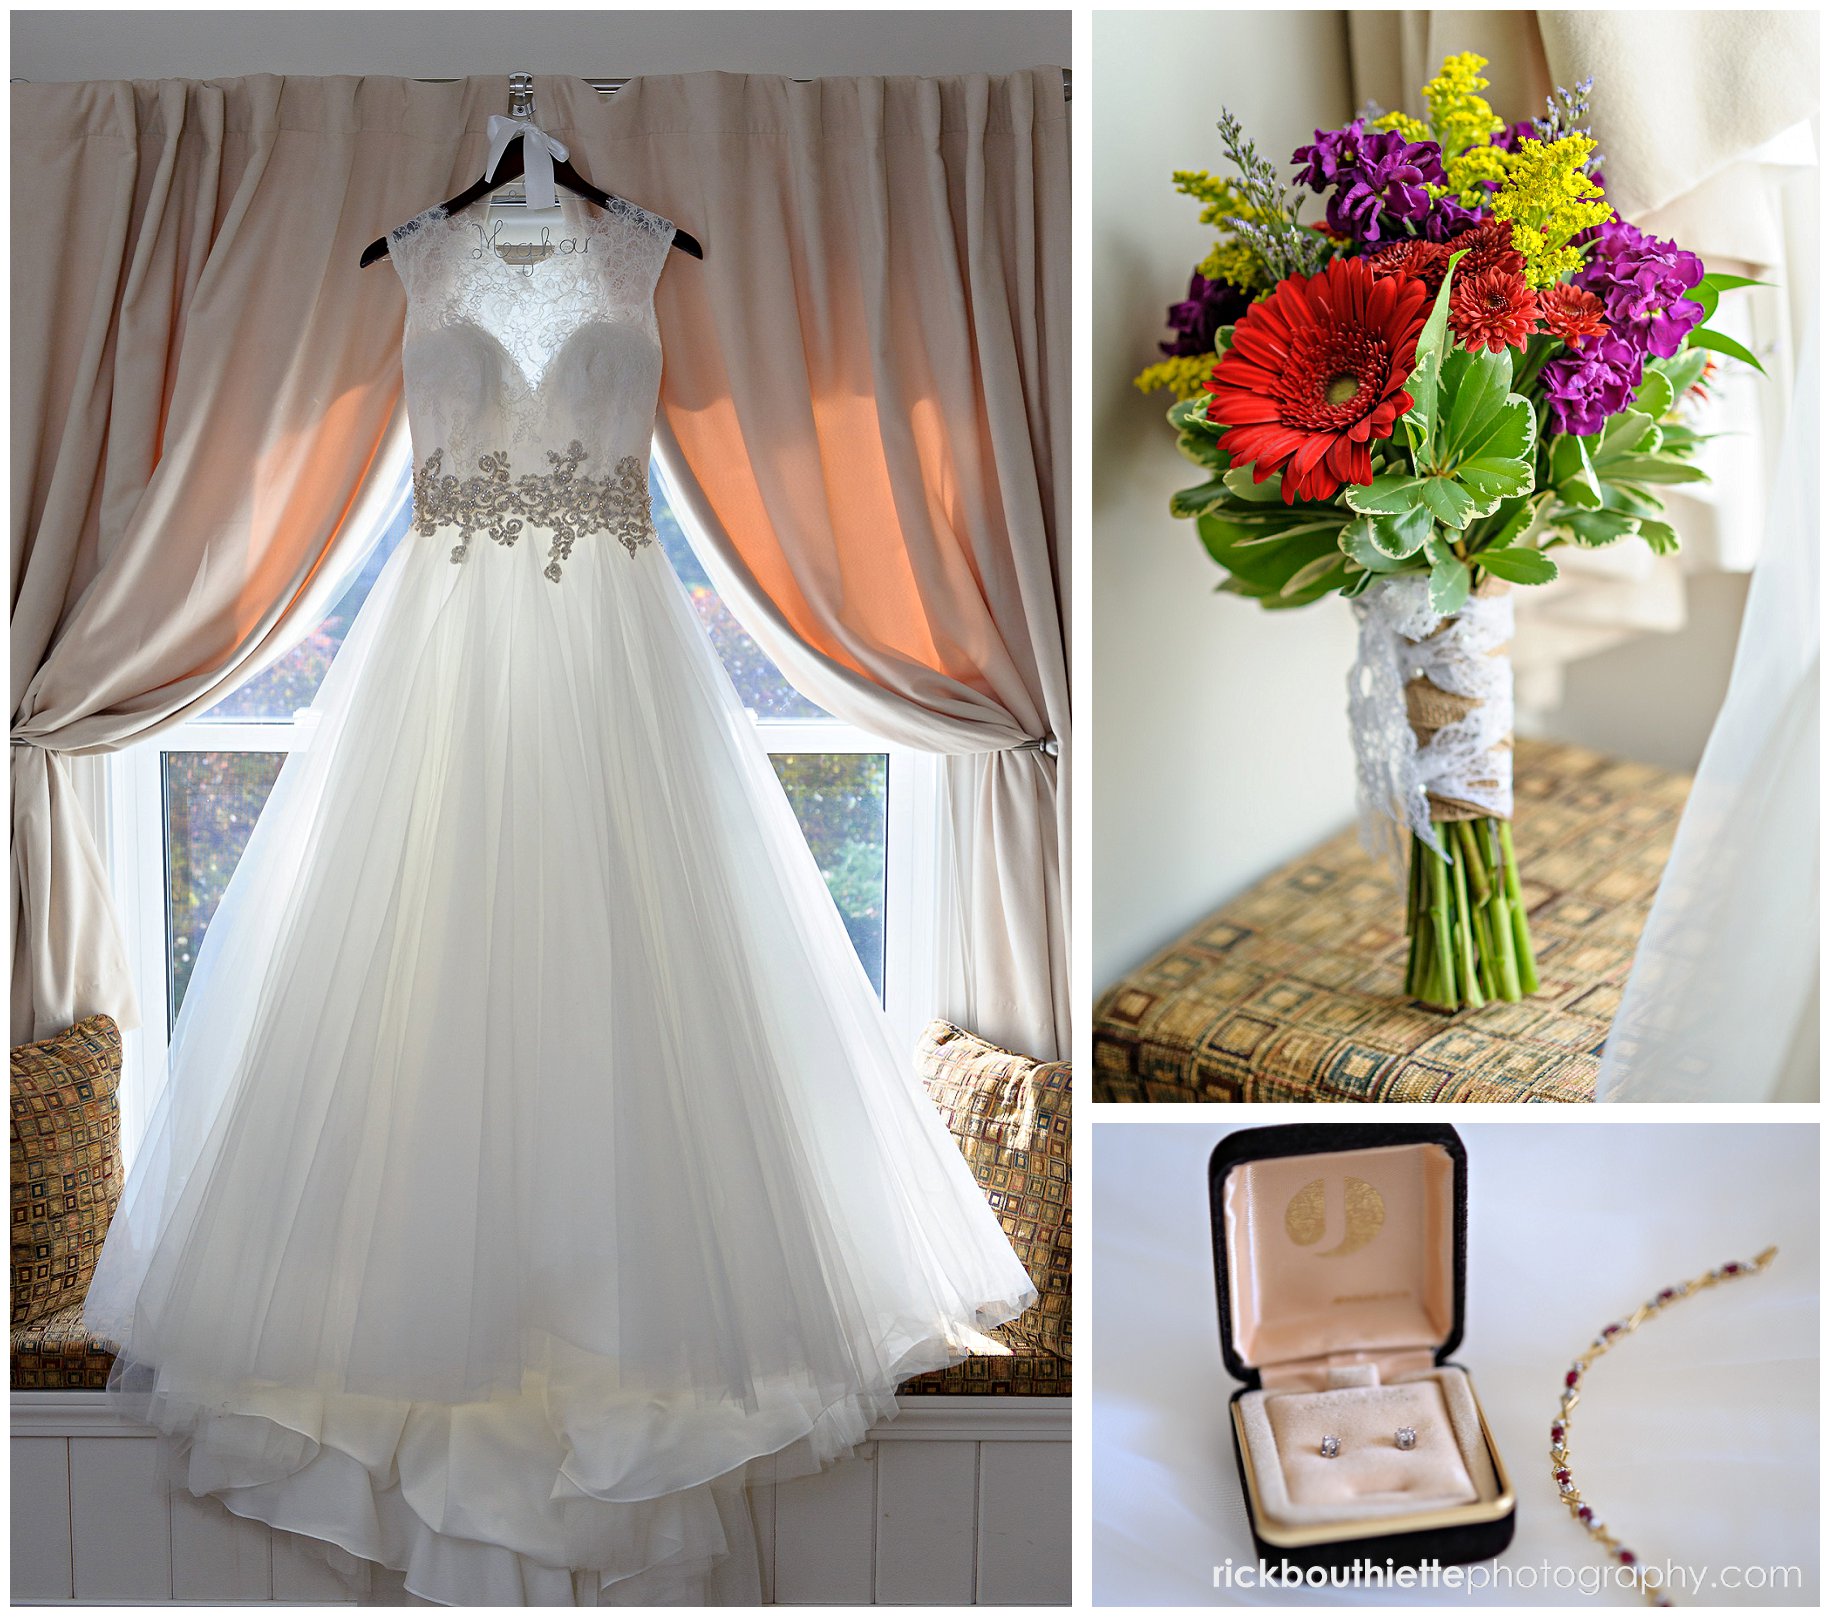 bride's dress, bouquet and jewelry details